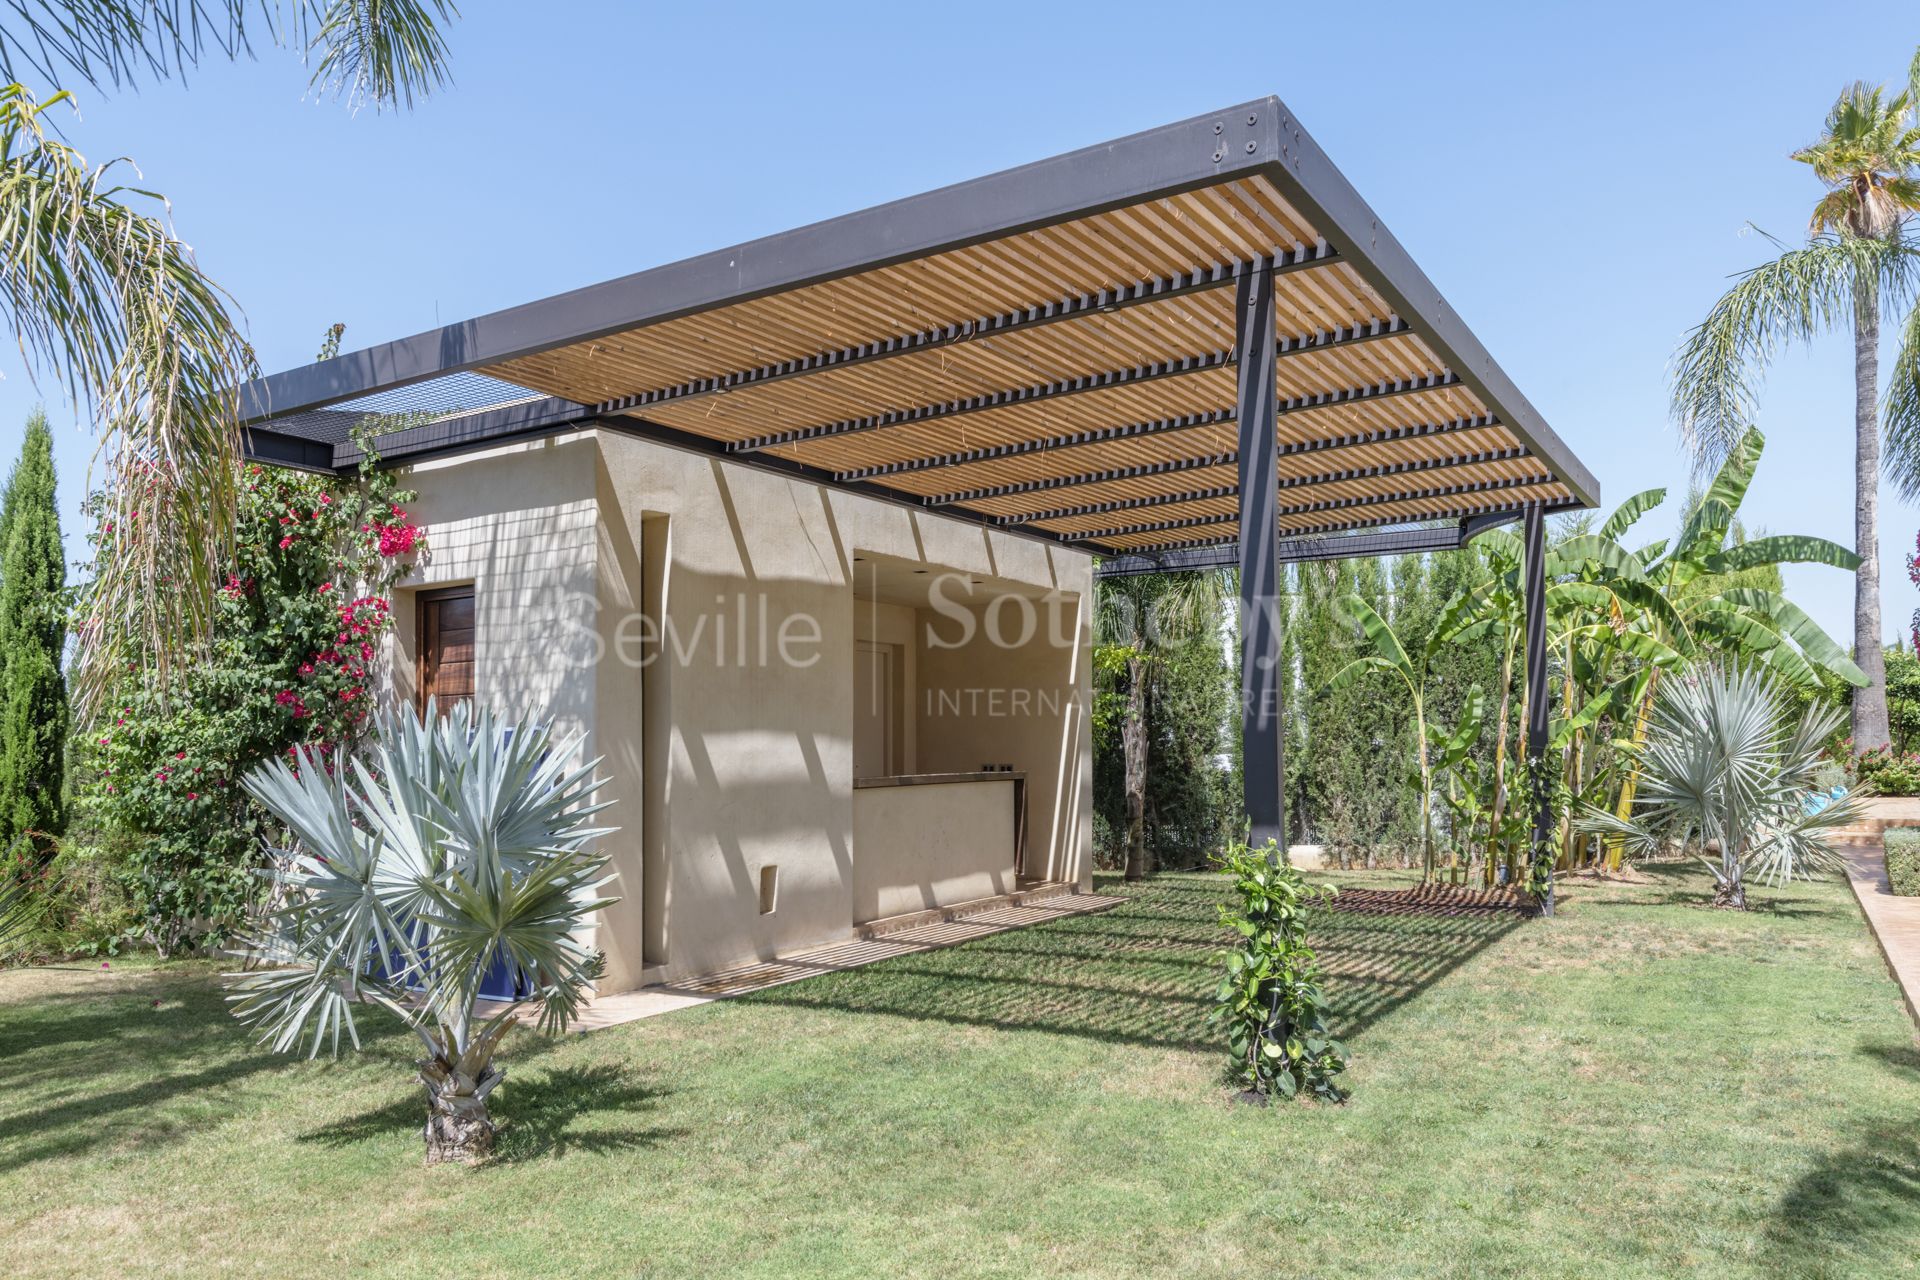 Super exclusive house with Hamman and Guest House. A natural oasis in Seville.